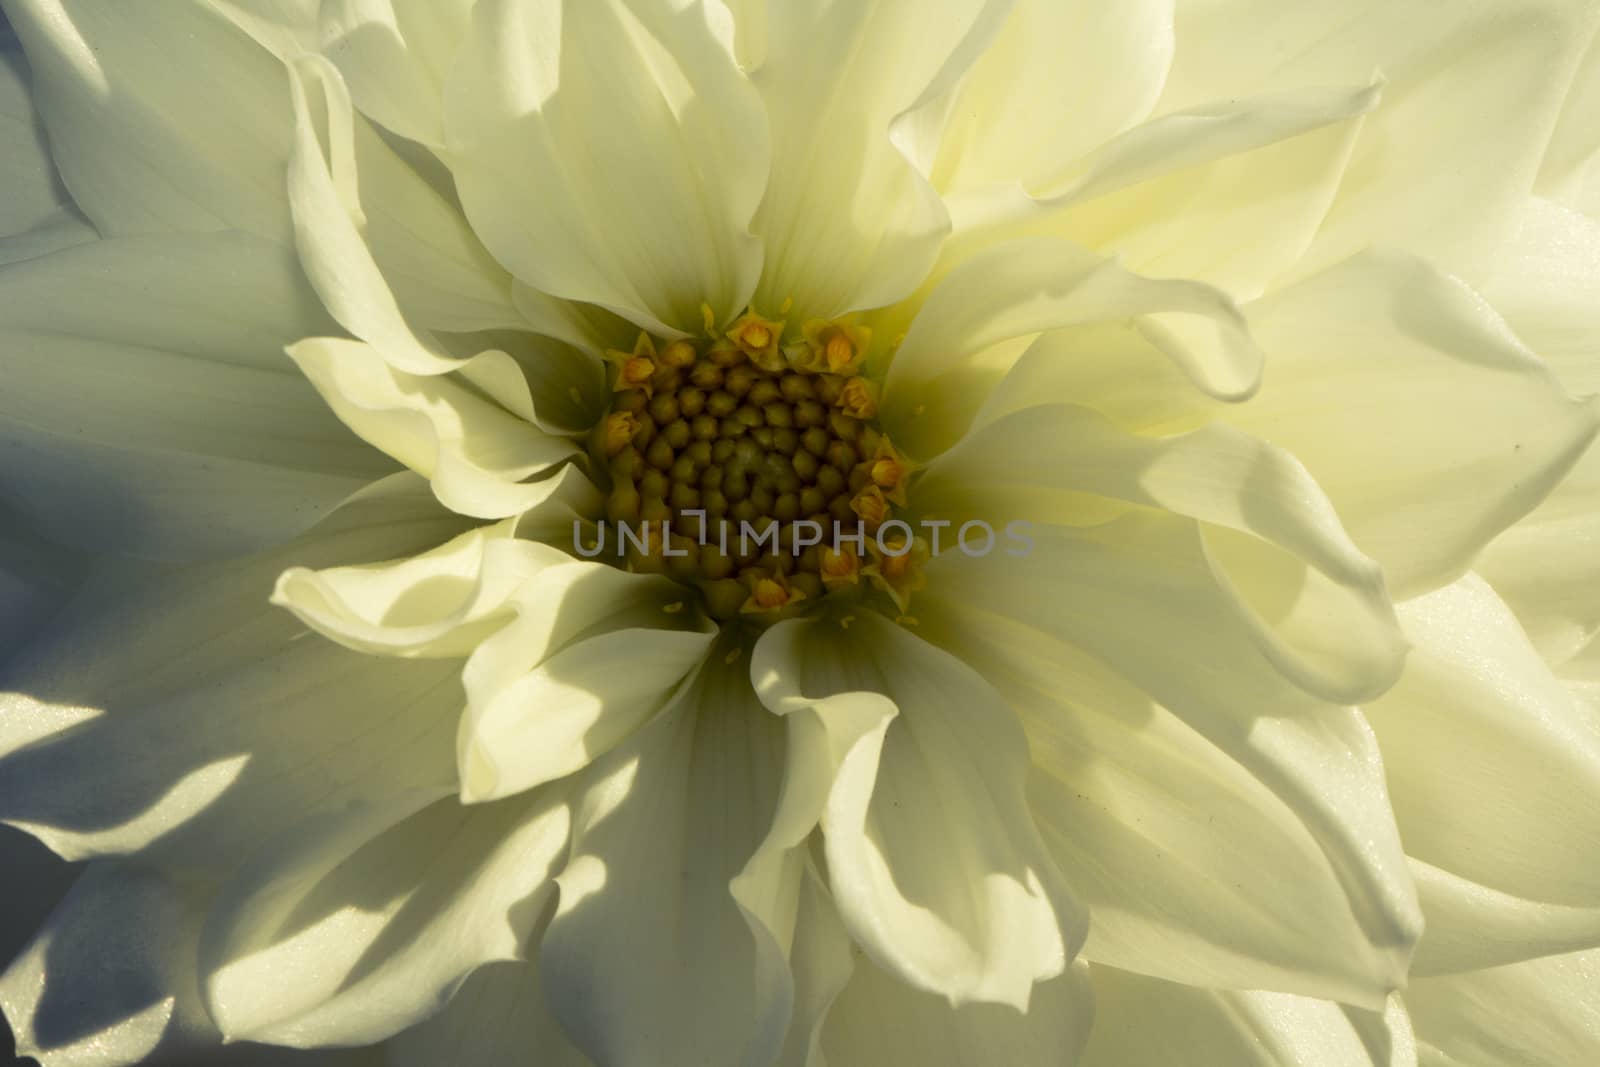 Symmetrical white and yellow flower in autumn.